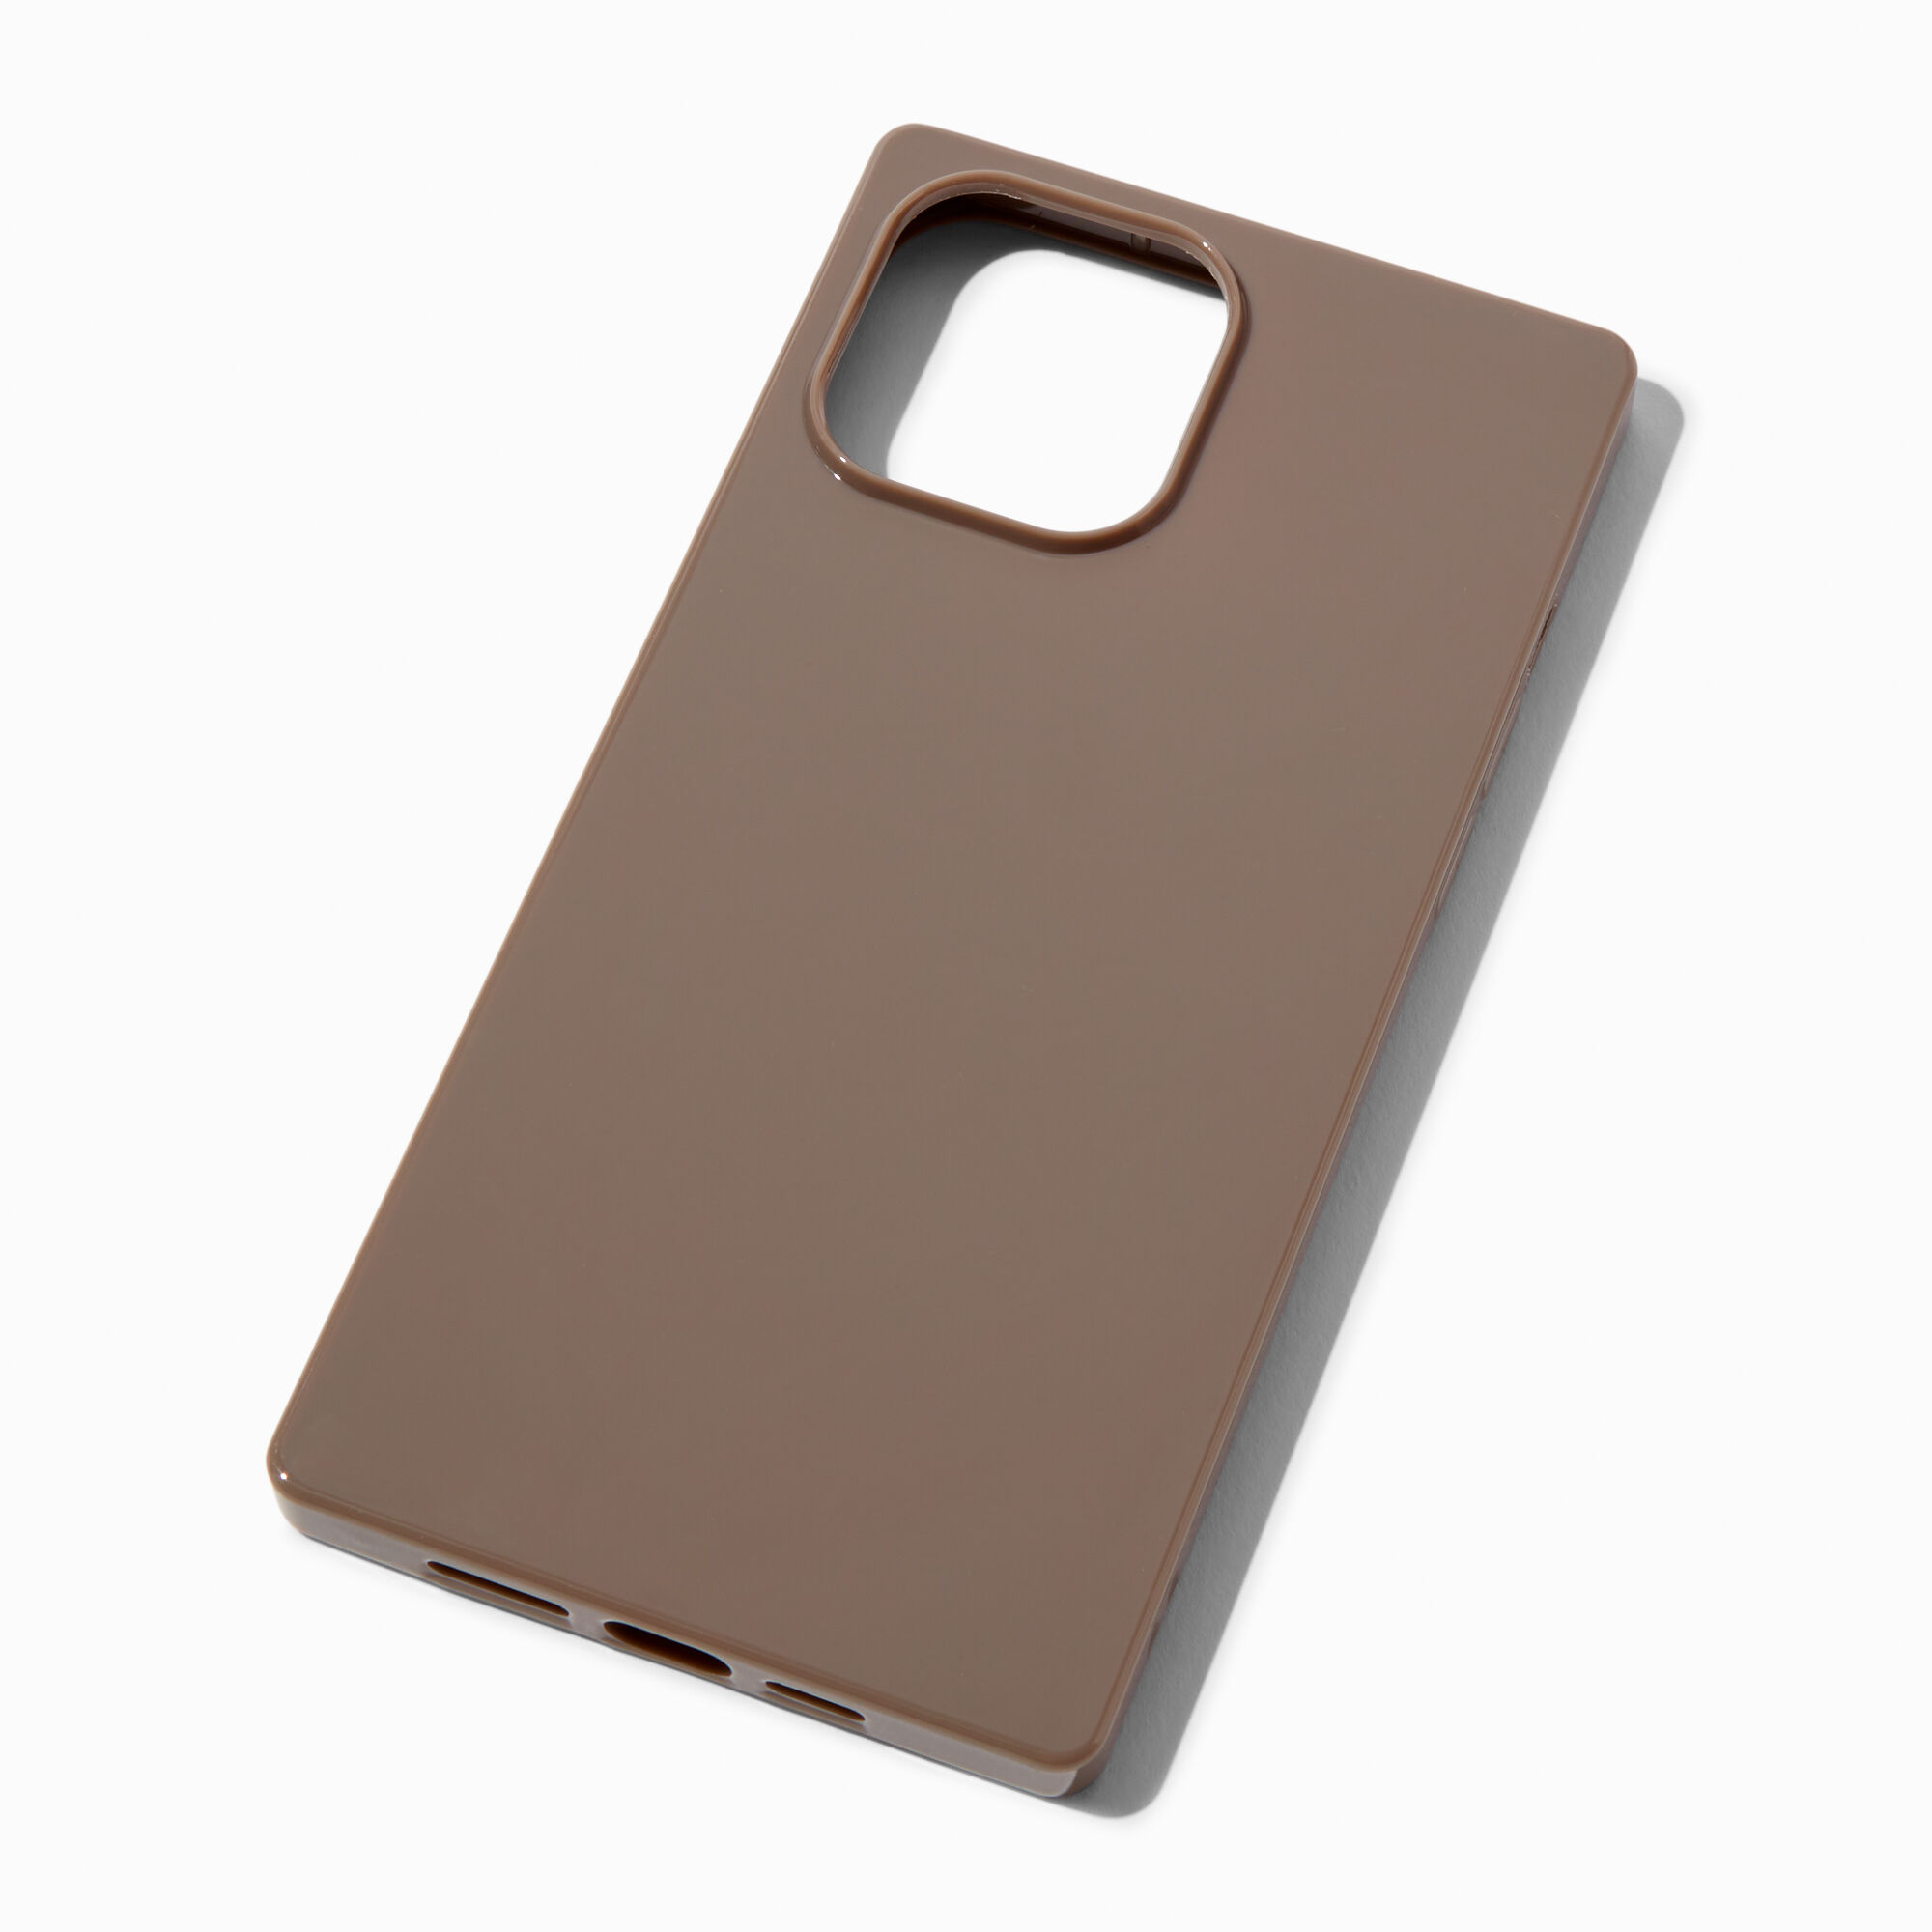 View Claires Shiny Protective Phone Case Fits Iphone 13 Pro Max Brown information